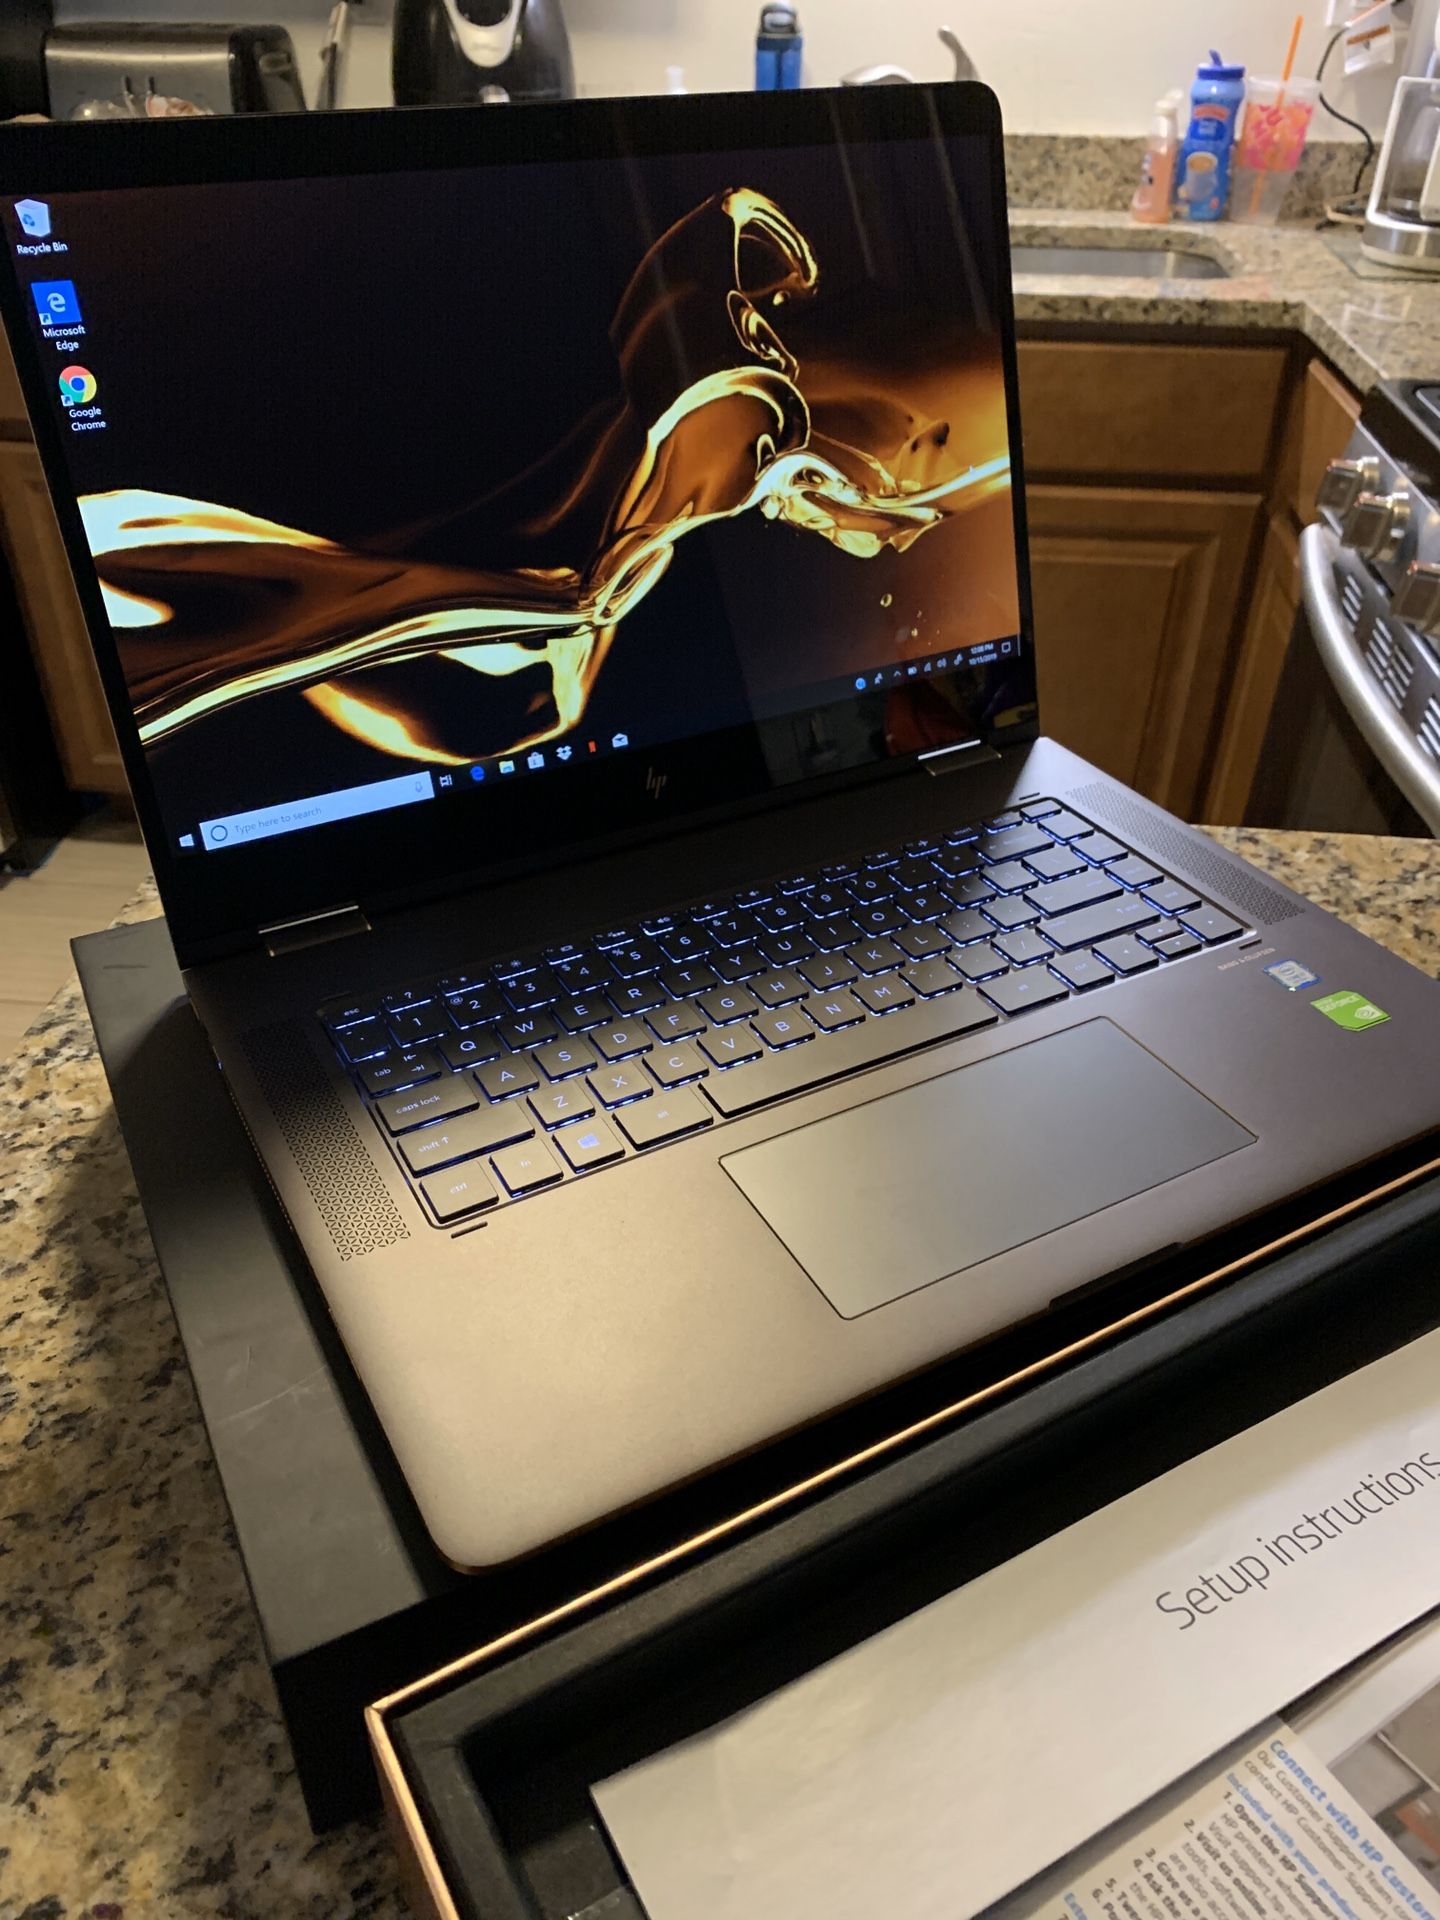 Hp specter 15 8 generation. I7 16 gb. 512 ssd. Like new sleeve includes running windows 10